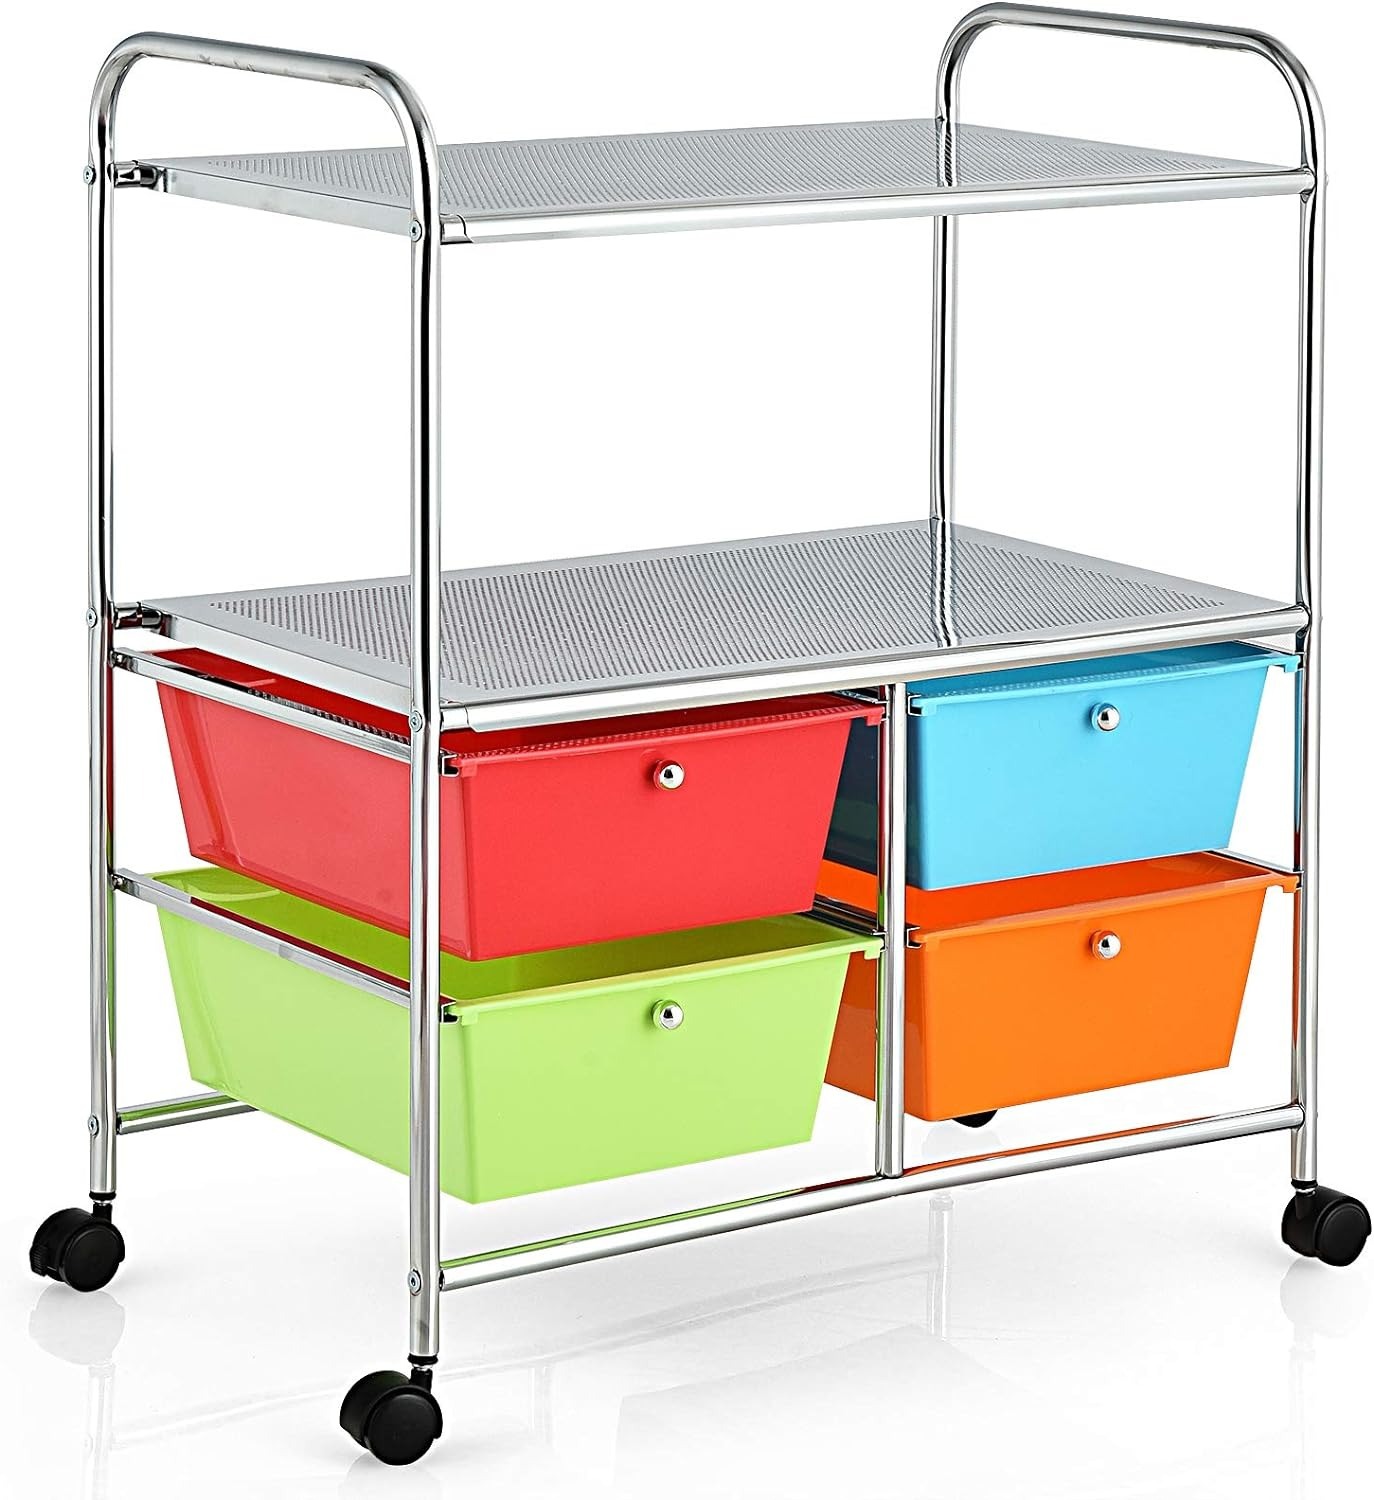 2-Tier Rolling Storage Cart w/ 4 Drawers & 360° Wheels (Various Colors) $39.59 + Free Shipping